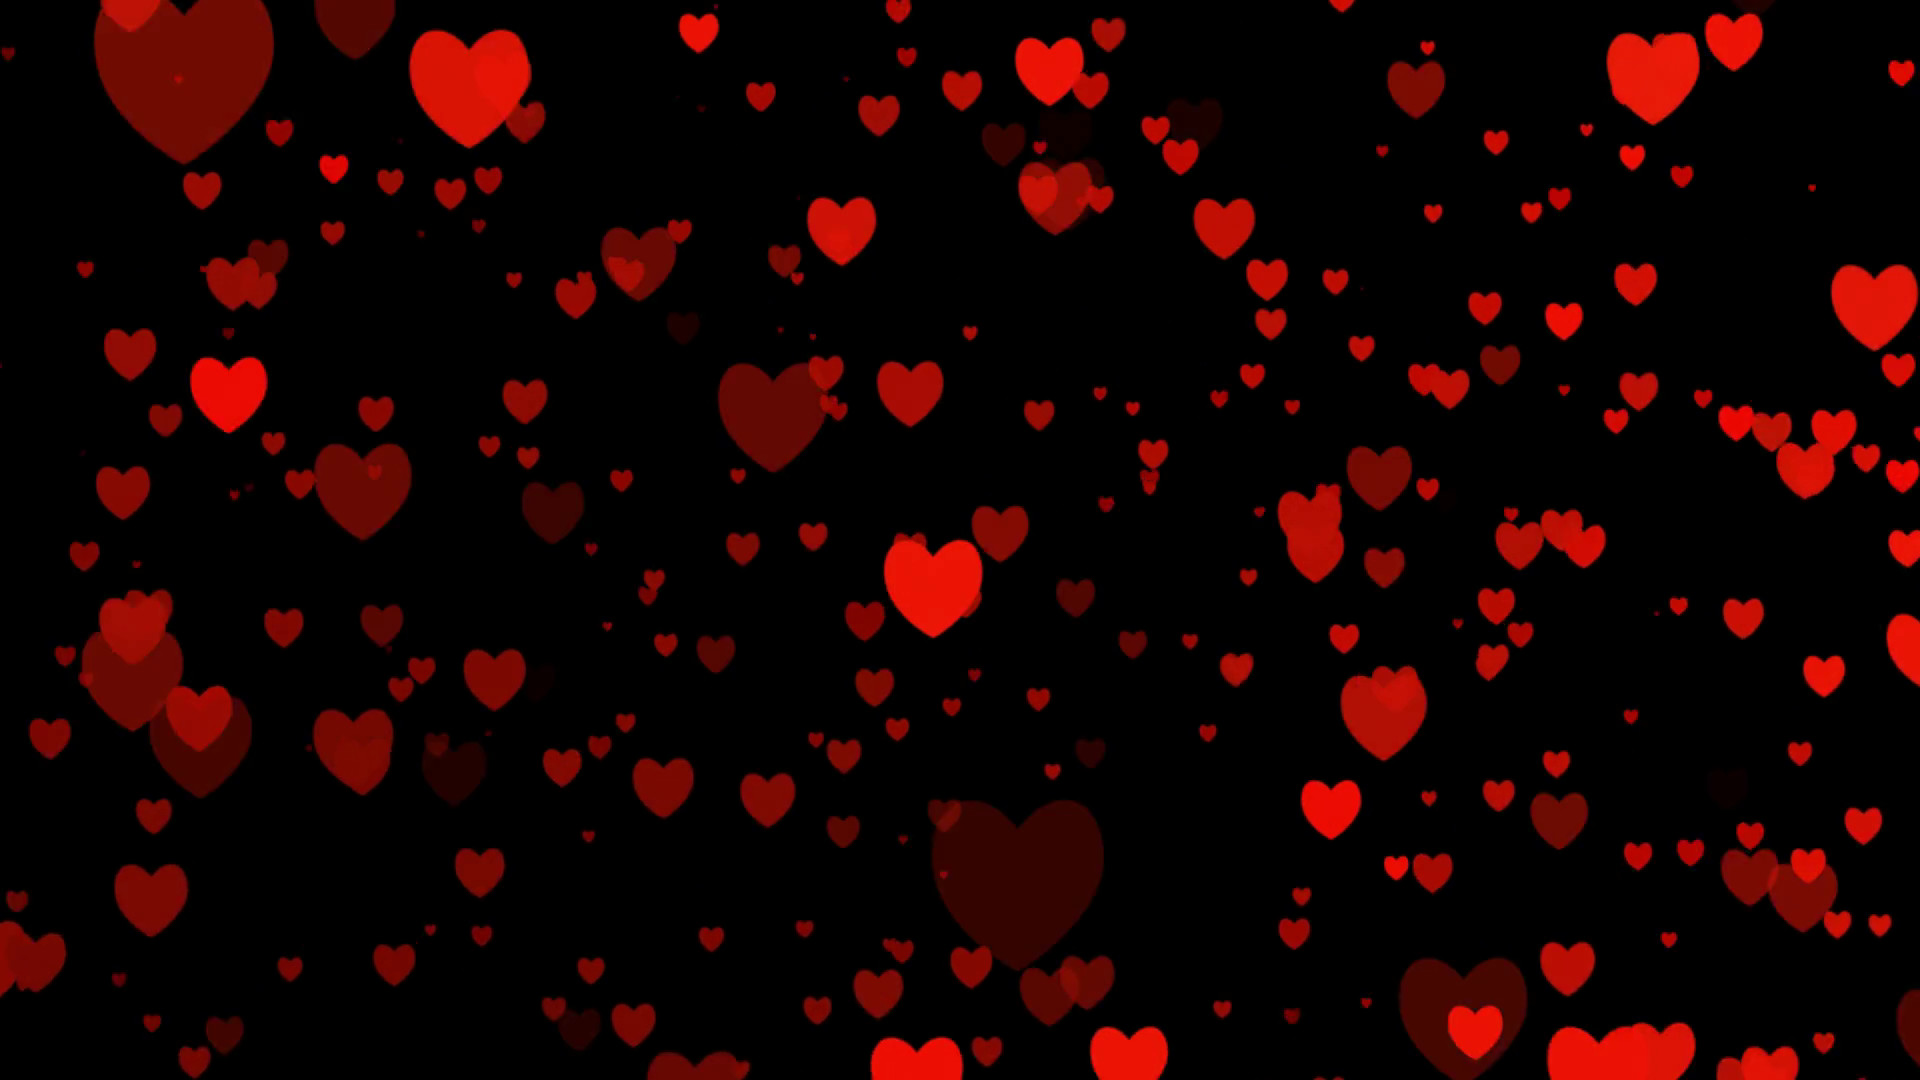 Red Heart Black Background (46+ images)